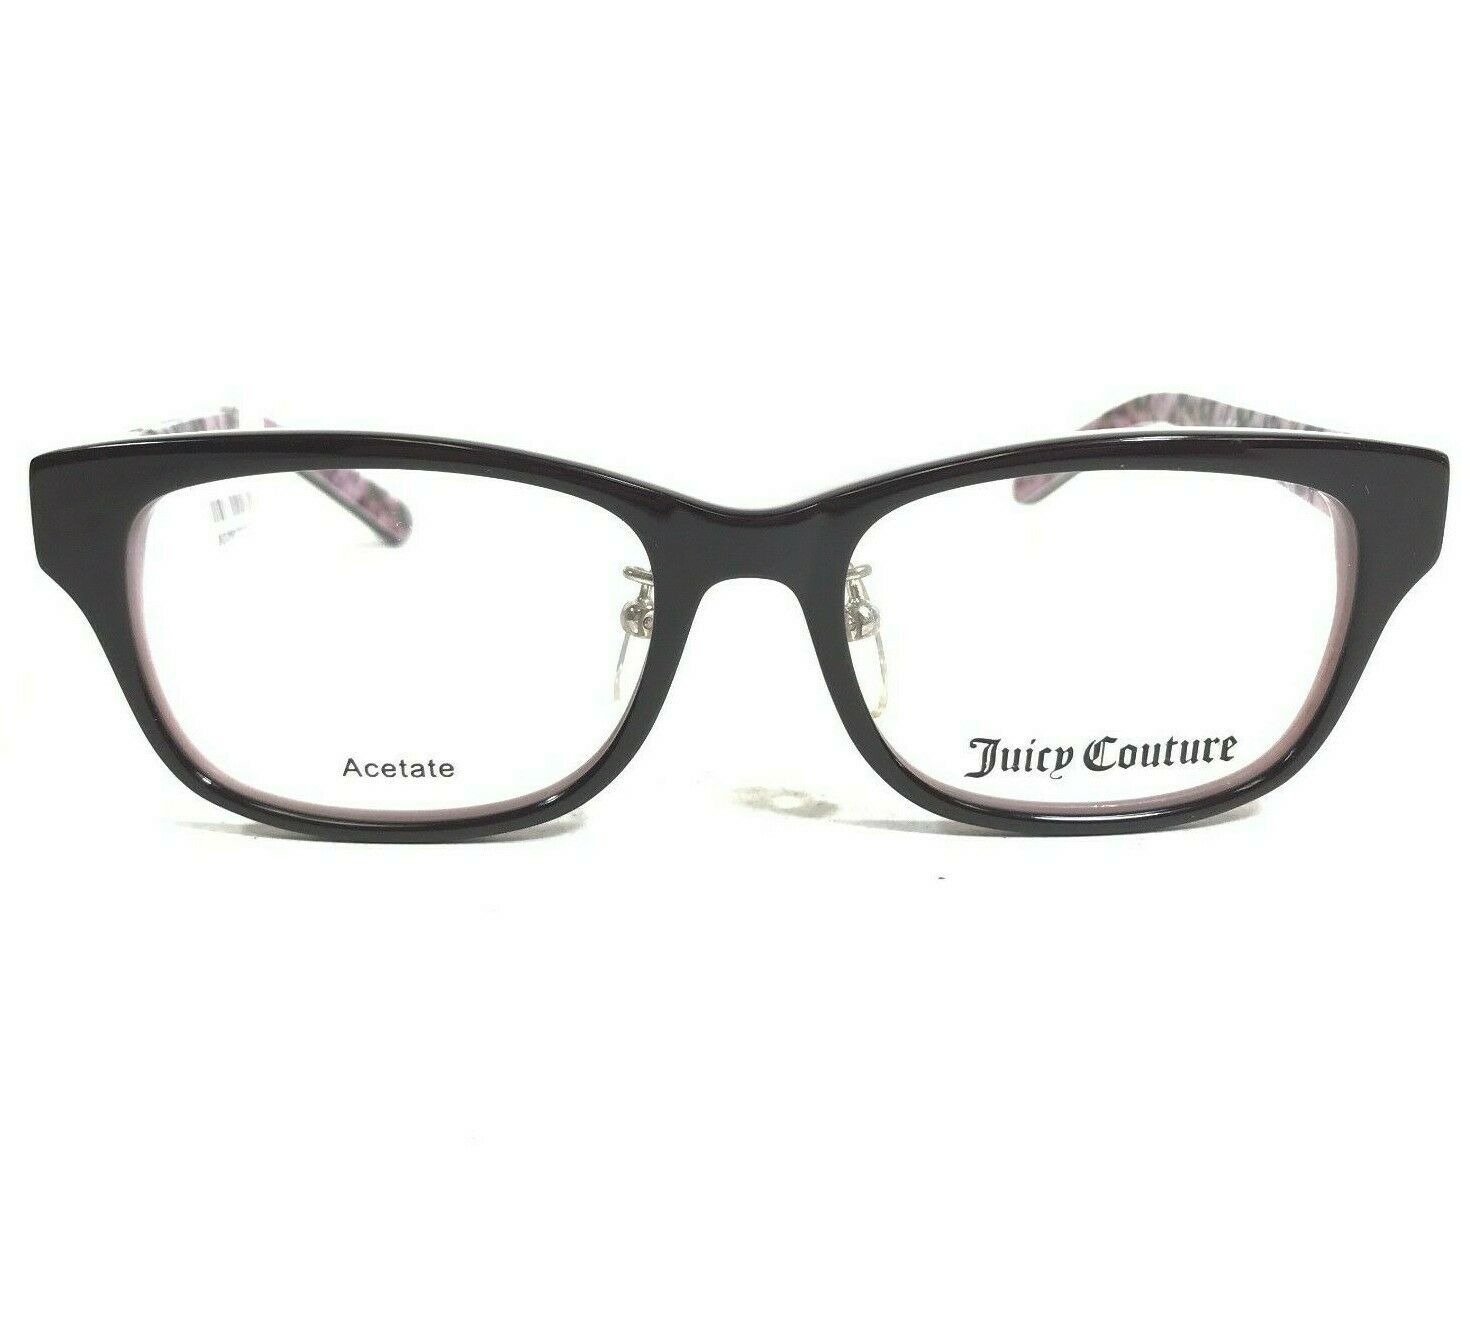 Primary image for Juicy Couture Kids Eyeglasses Frames JU921/F 0ERN Purple Square 45-15-120